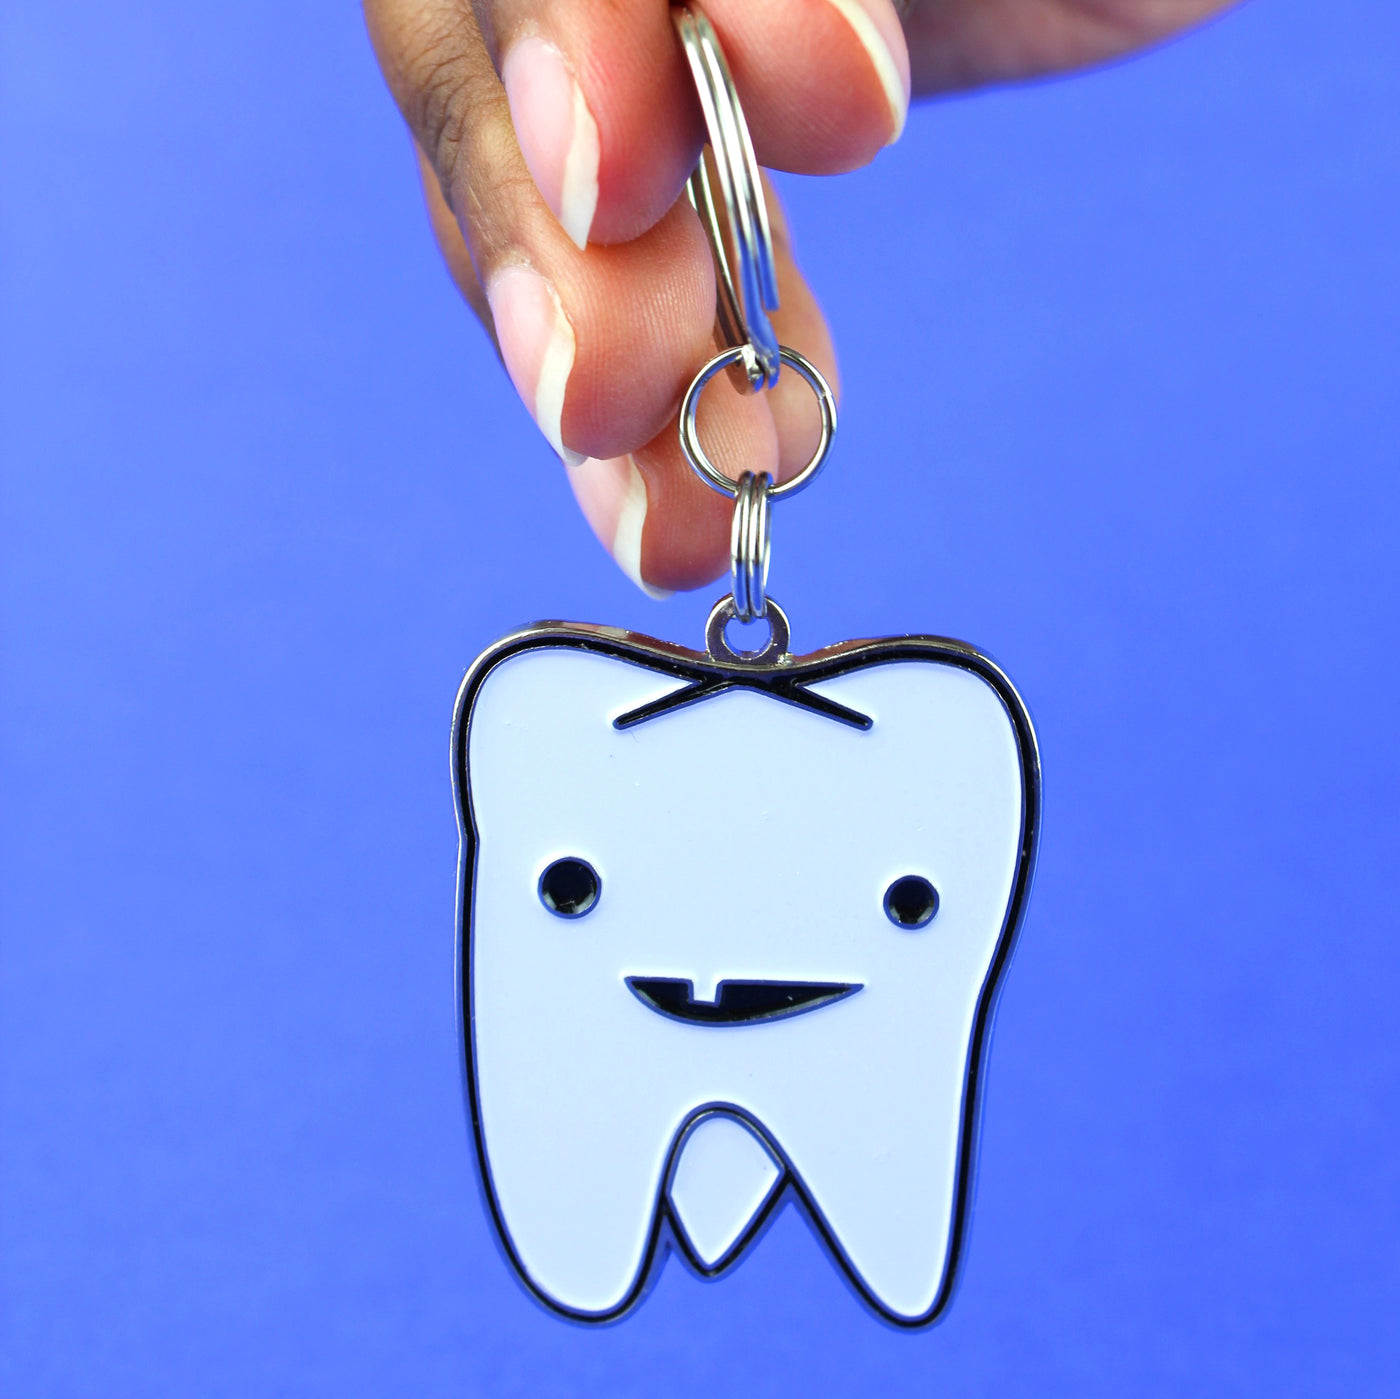 Tooth Keychain - Cute Tooth Keychain - Funny Dentist Keychains & Gifts